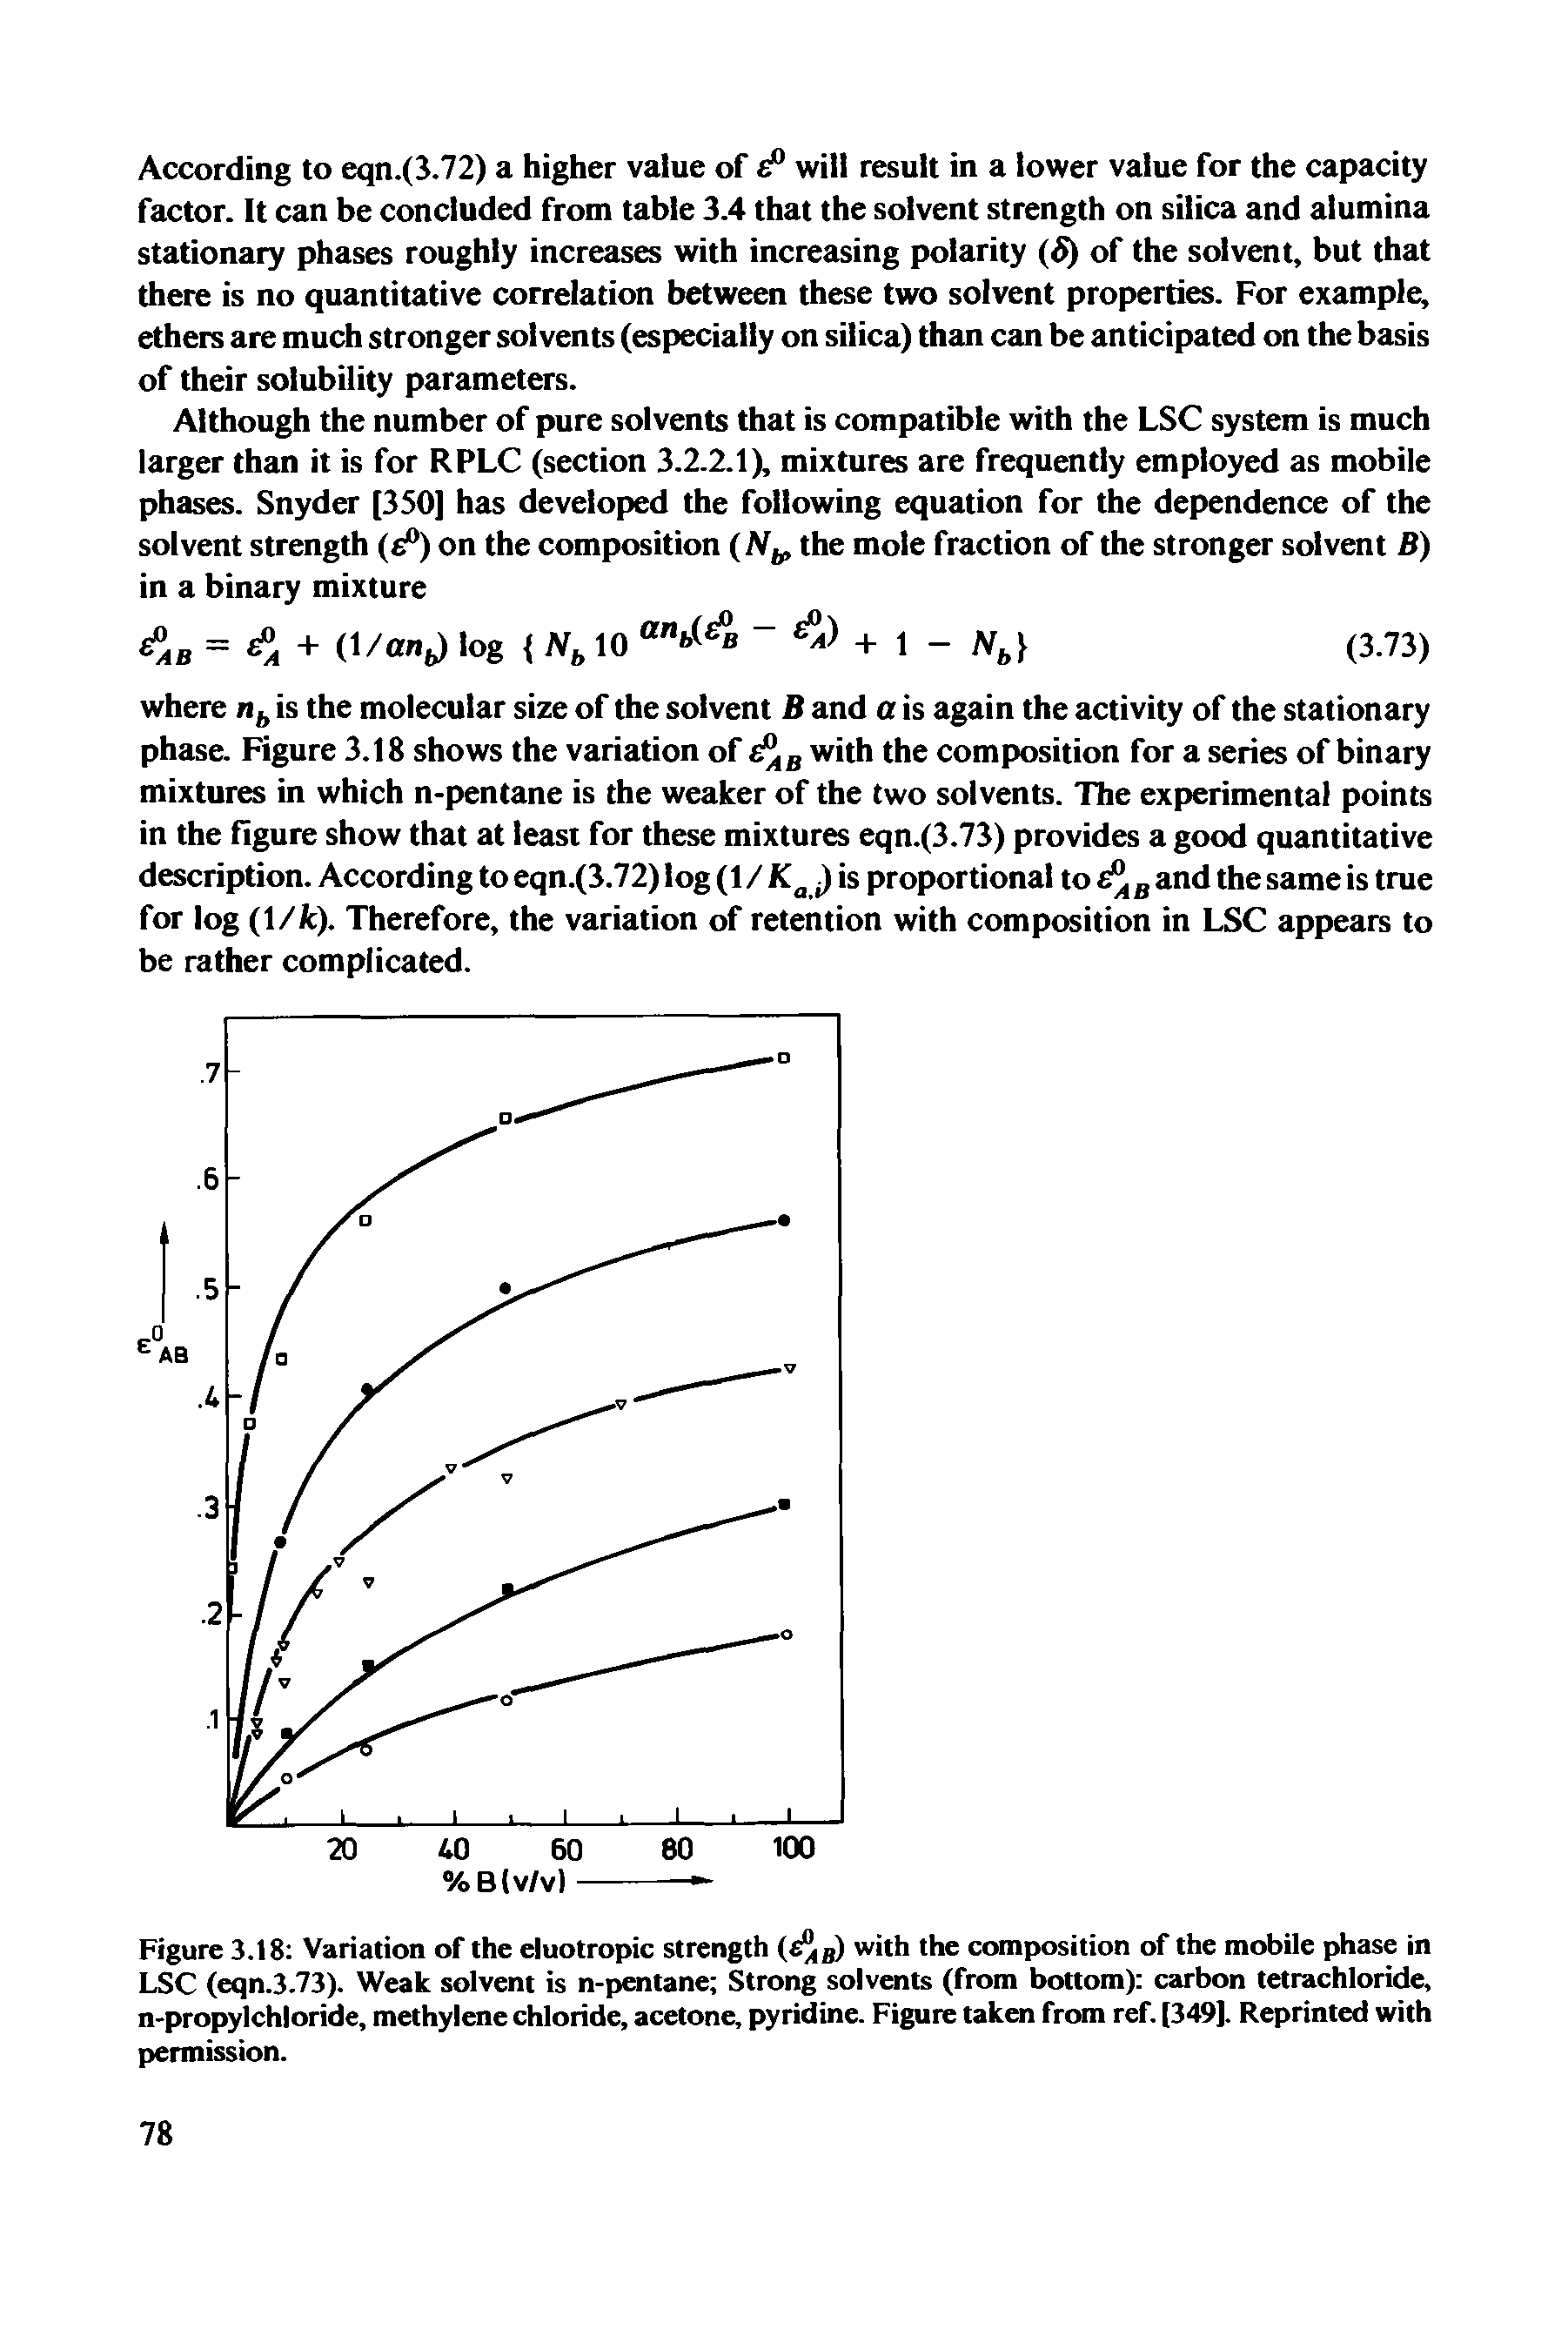 Figure 3.18 Variation of the eluotropic strength ( %) with the composition of the mobile phase in LSC (eqn.3.73). Weak solvent is n-pentane Strong solvents (from bottom) carbon tetrachloride, n-propylchloride, methylene chloride, acetone, pyridine. Figure taken from ref. (349]. Reprinted with permission.